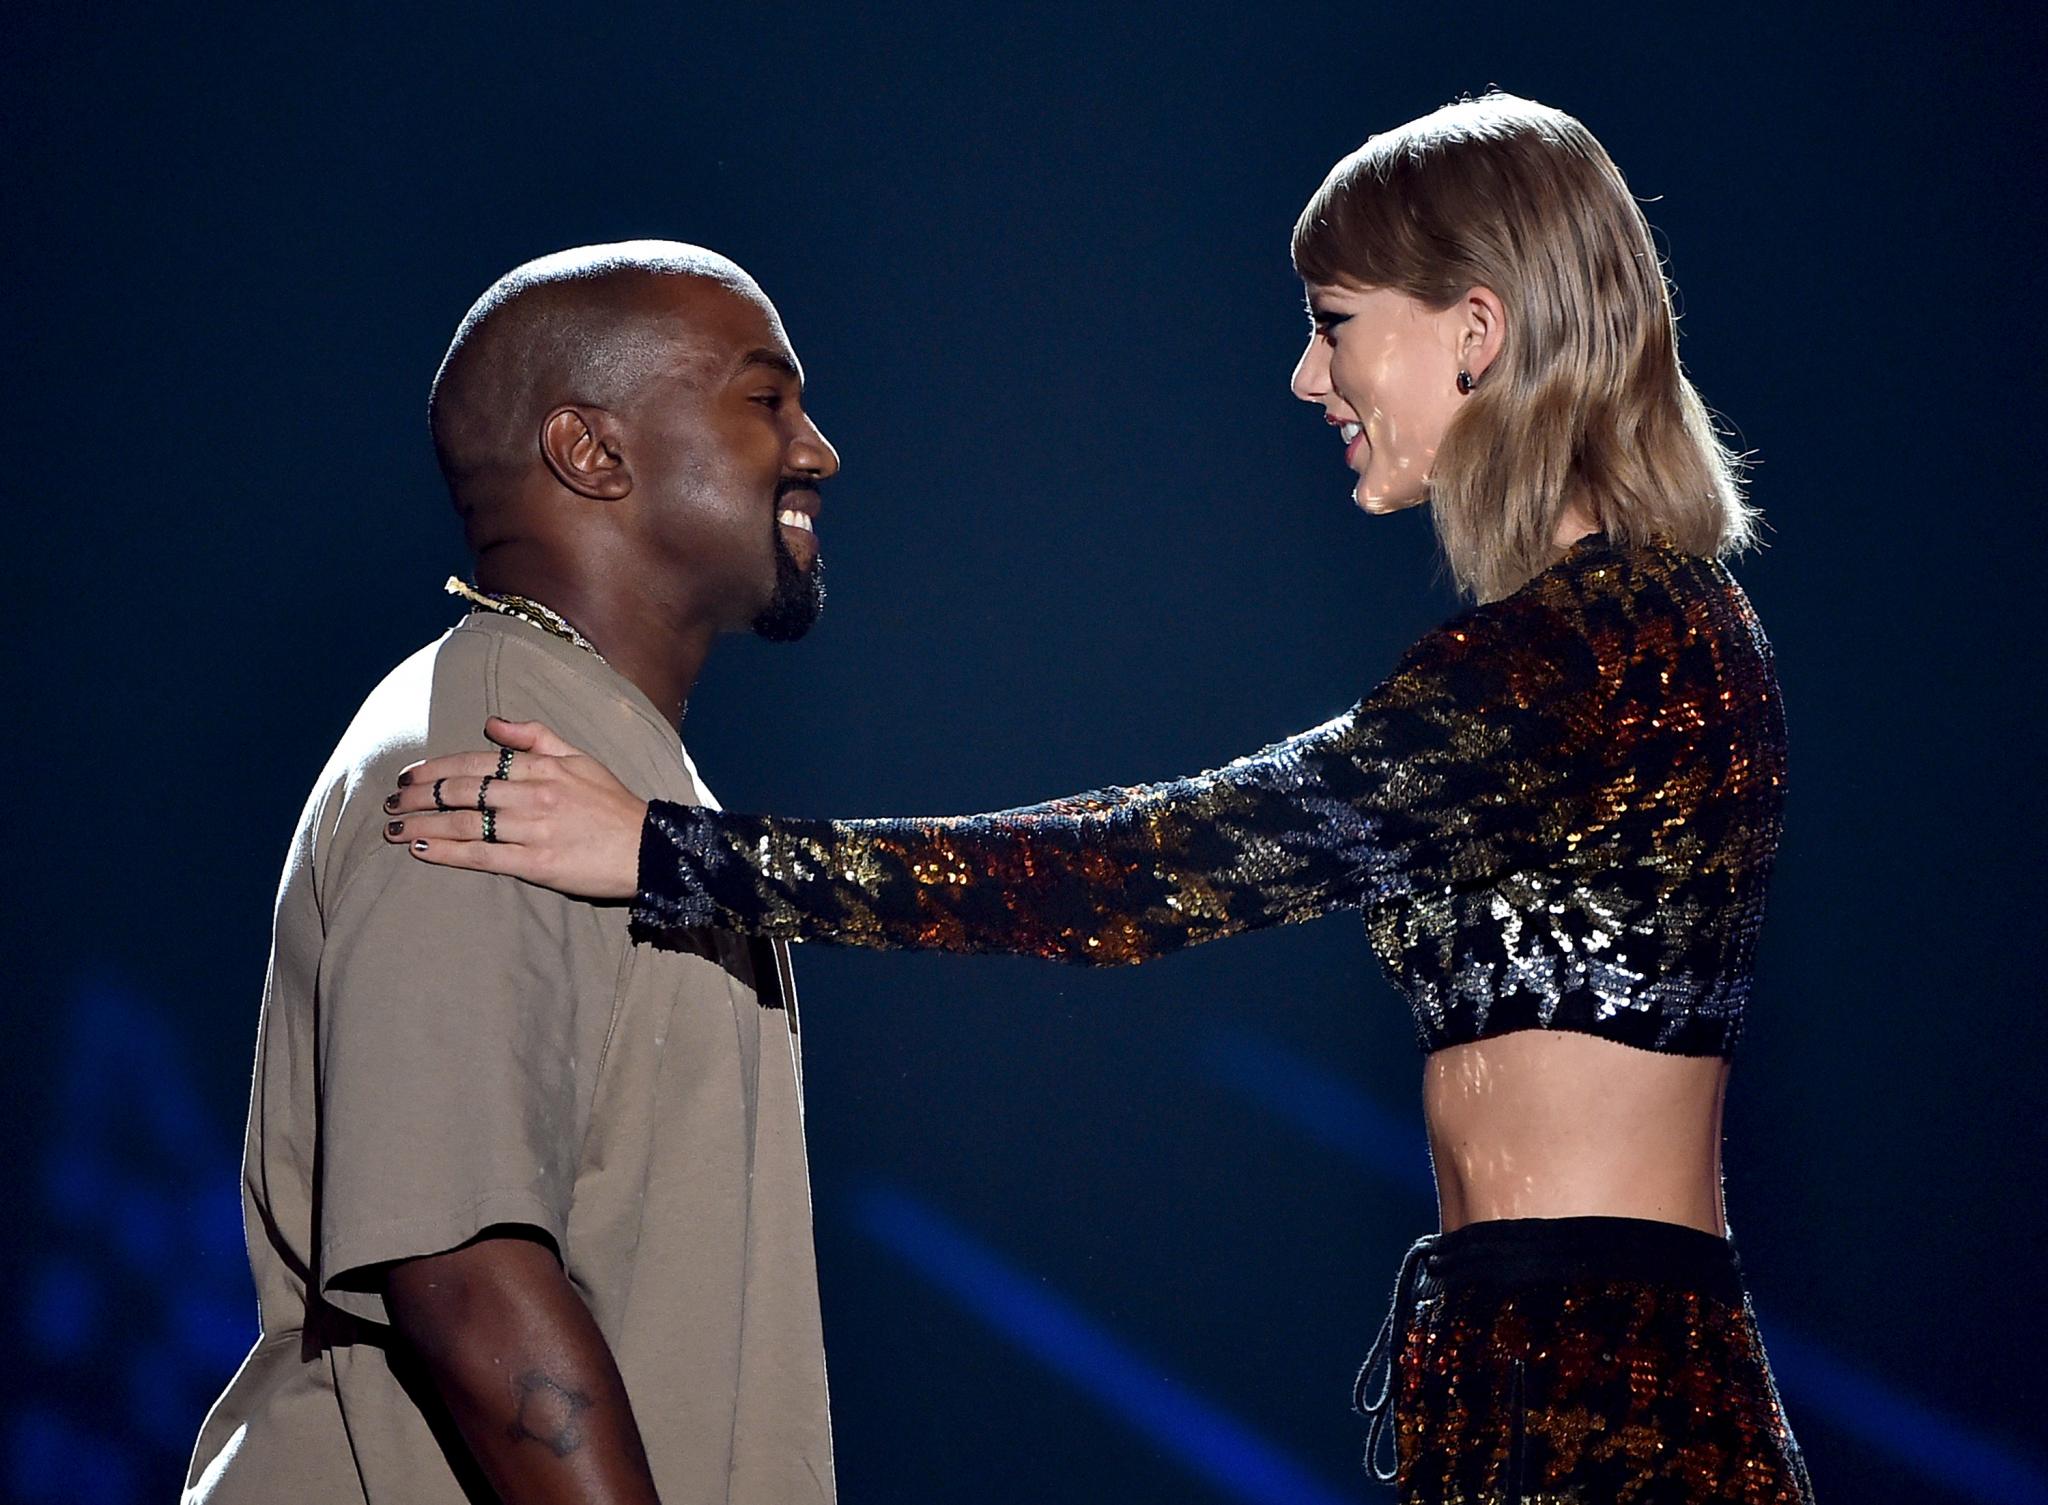 Did Kanye Really Get Taylor Swift's Blessing for His Controversial Lyrics on 'Famous'?